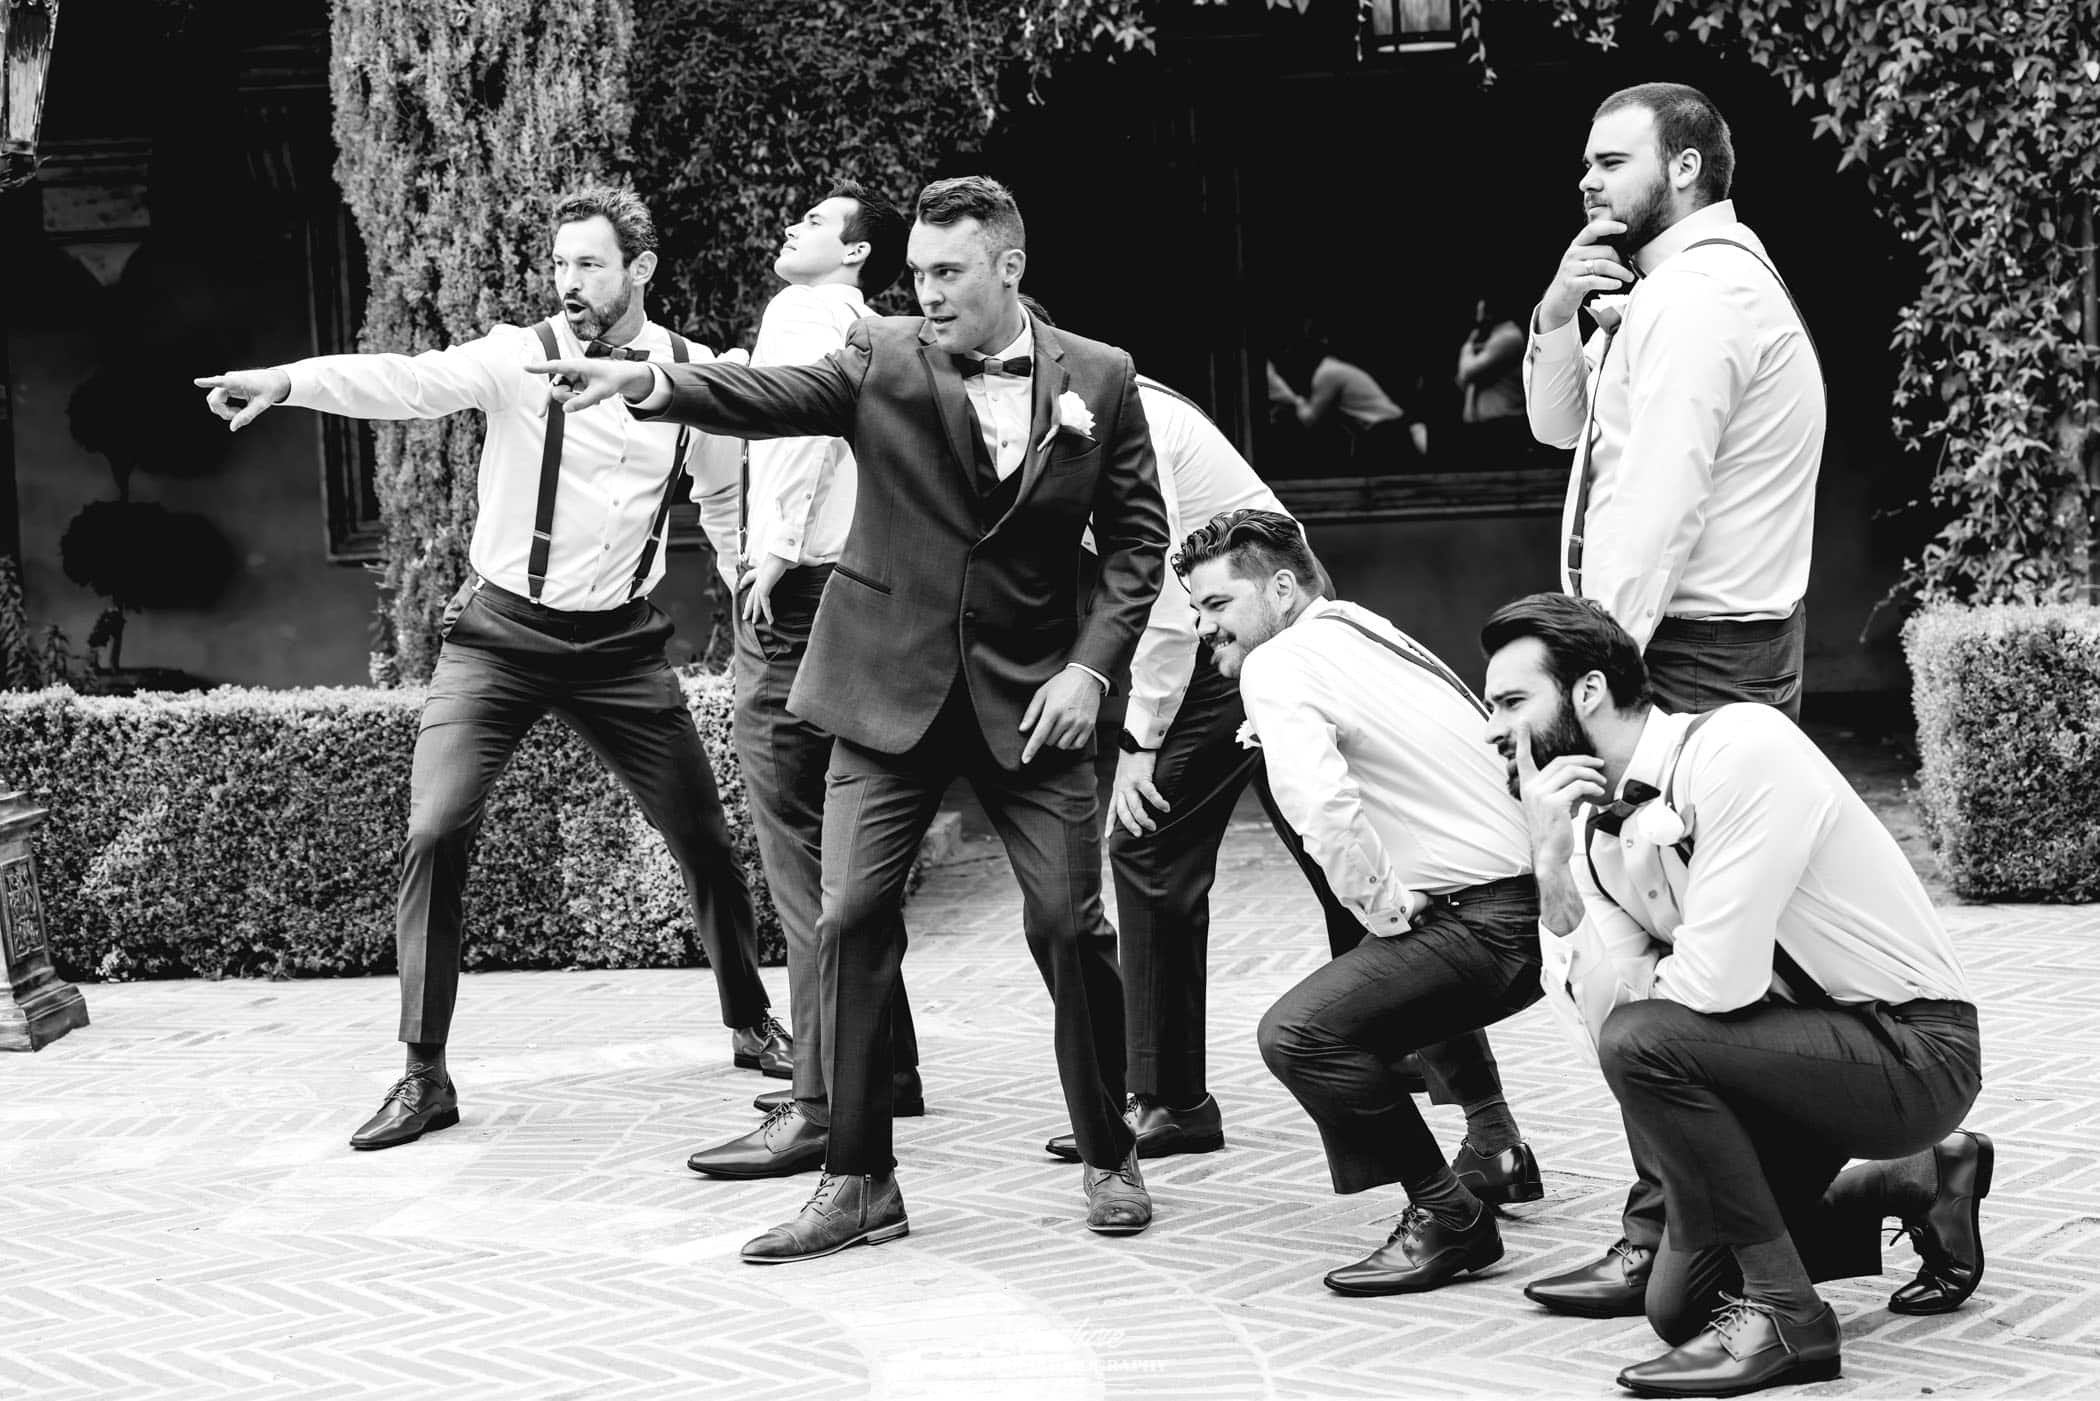 Groom and groomsmen funny pose black and white